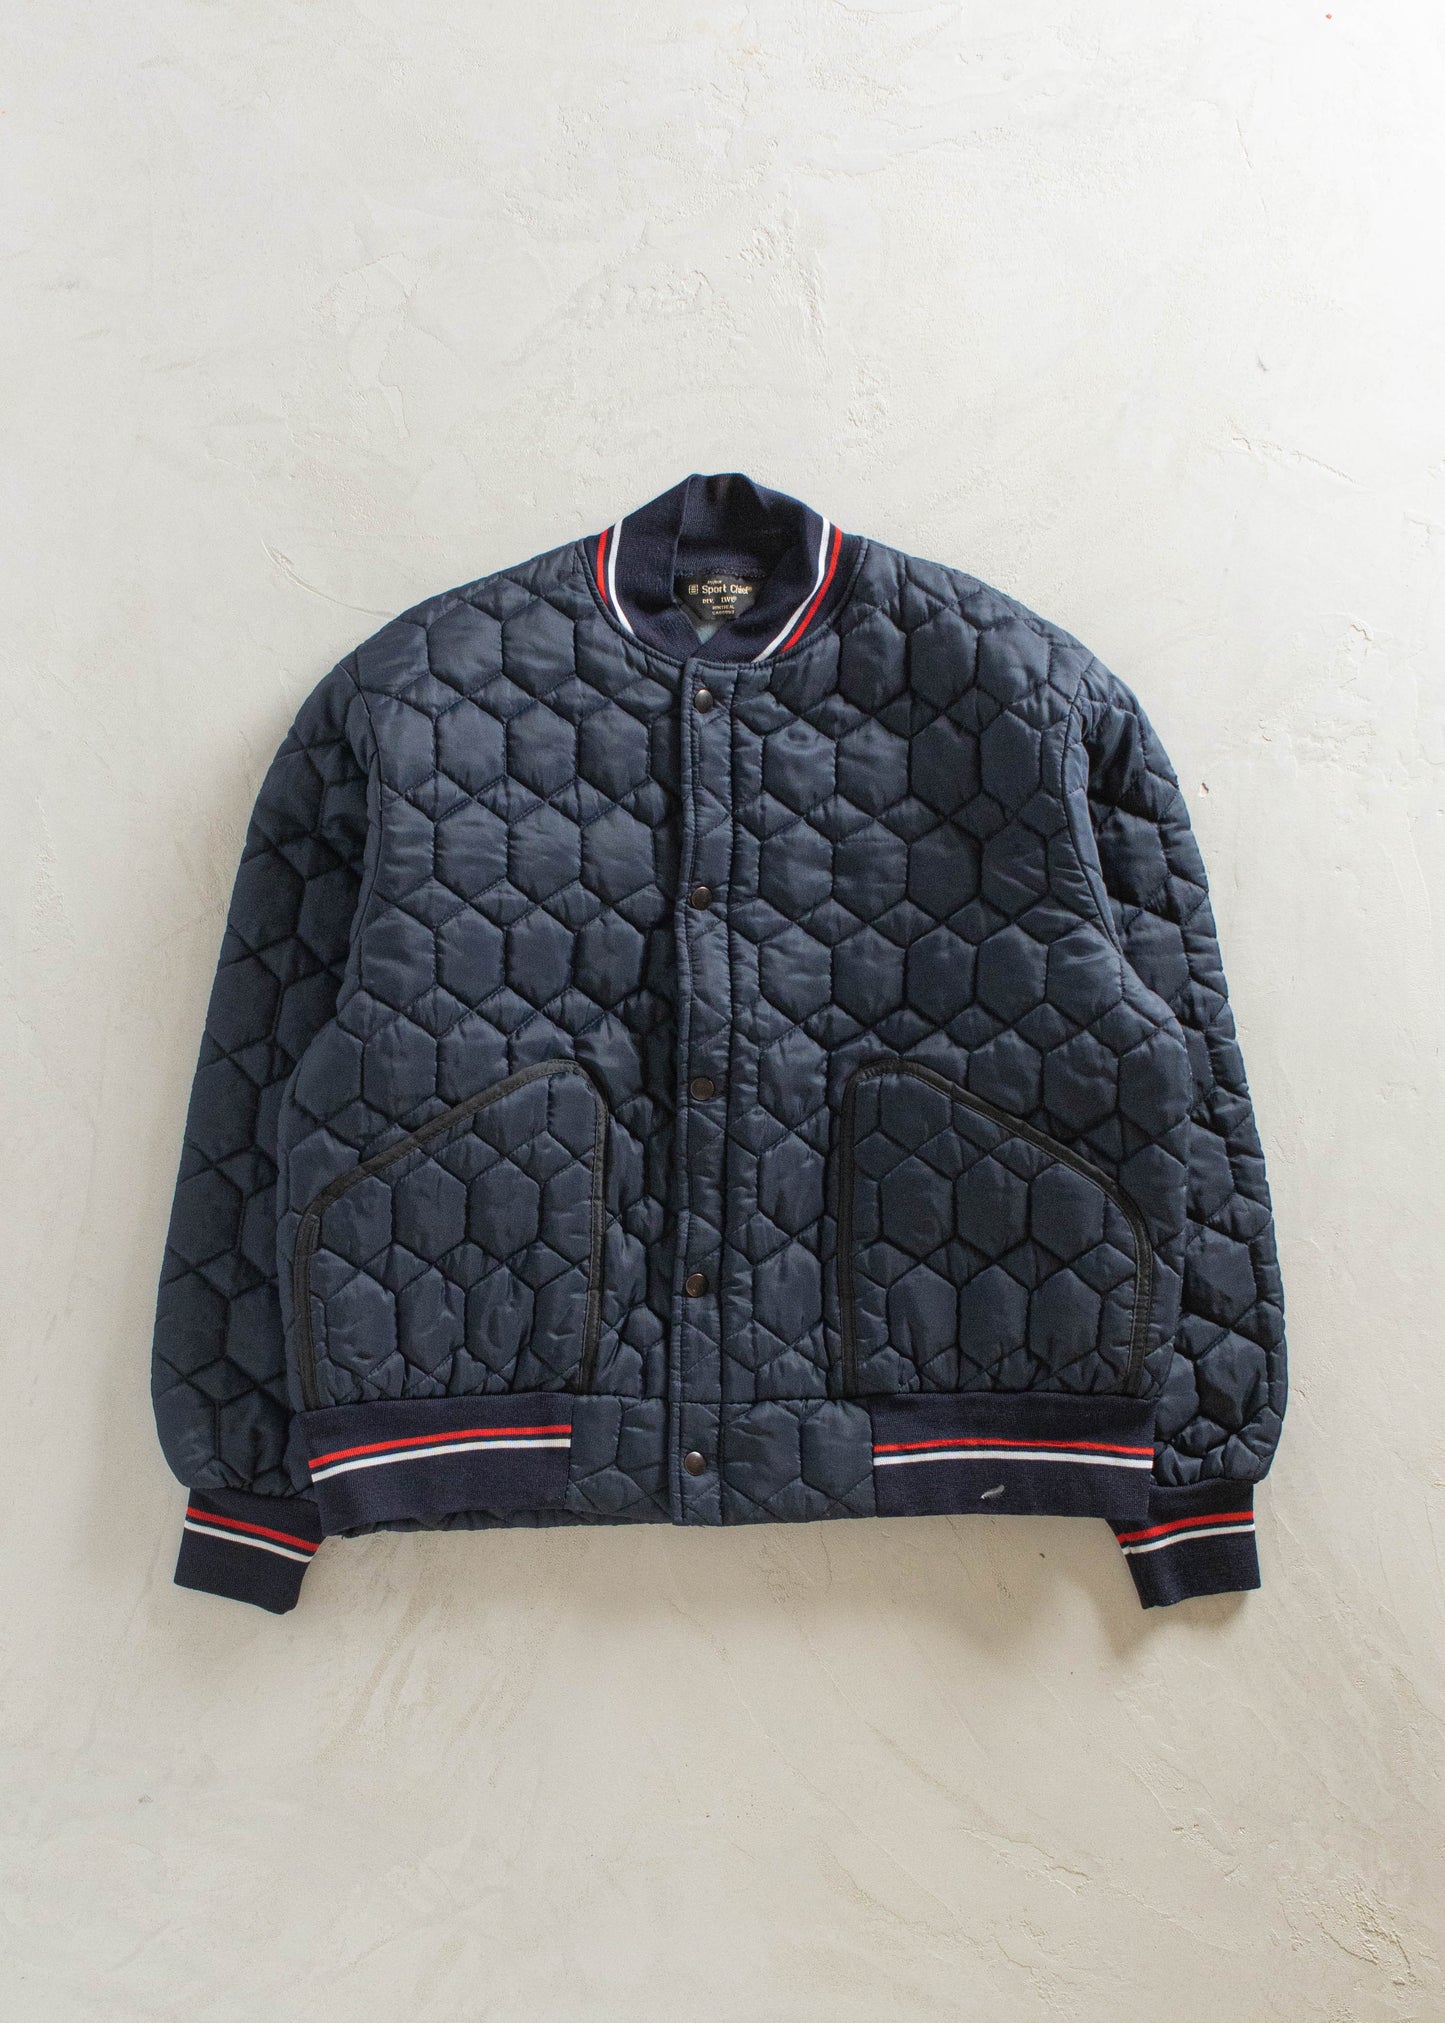 1980s Sportchief Quilted Nylon Jacket Size L/XL